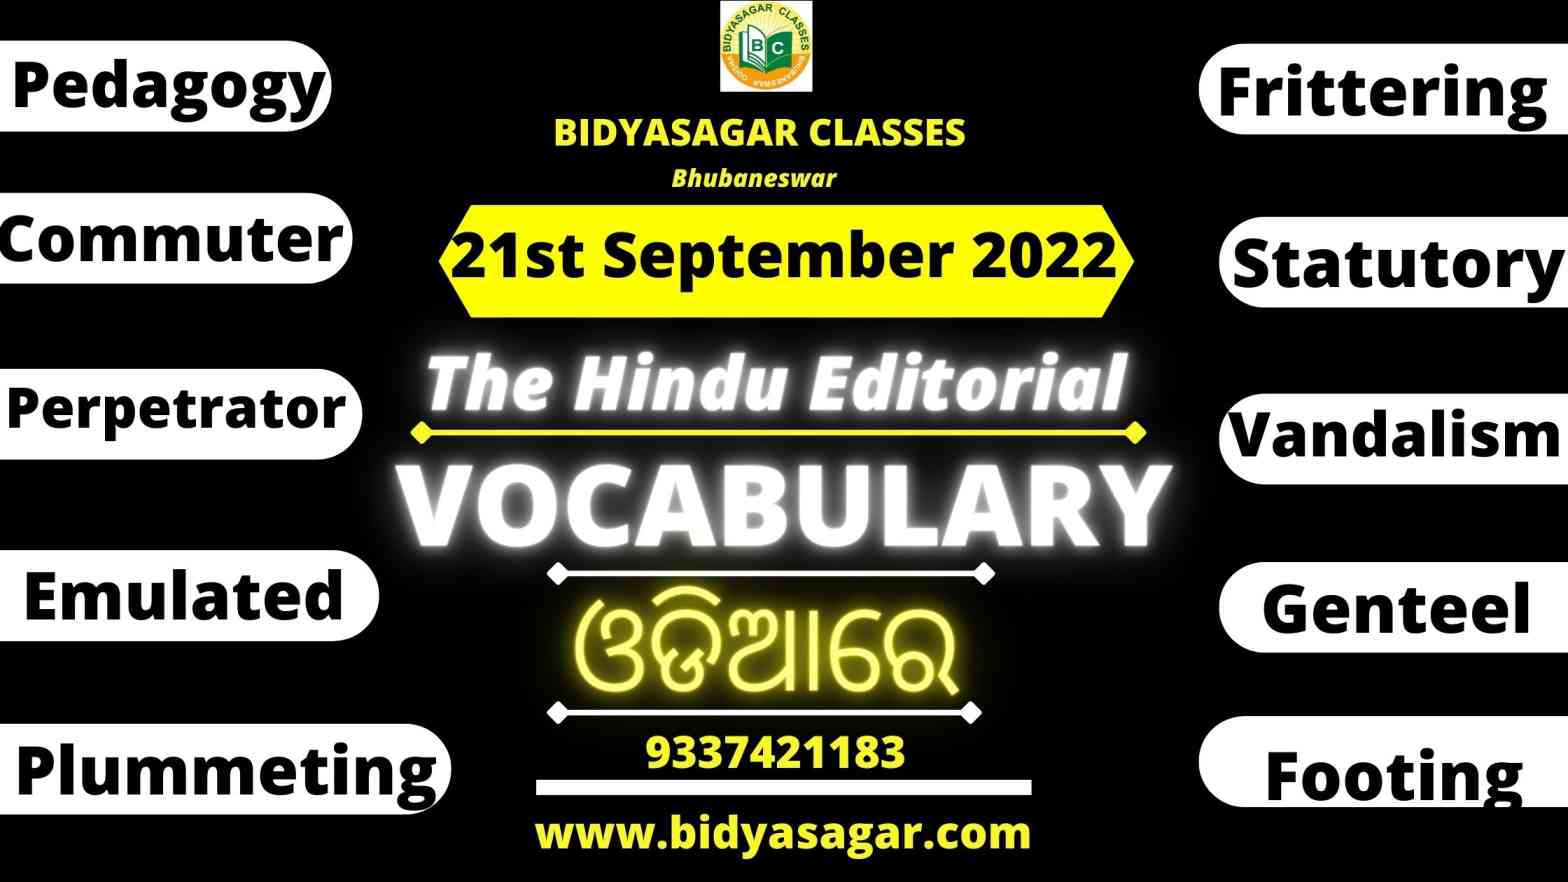 The Hindu Editorial Vocabulary of 21st September 2022